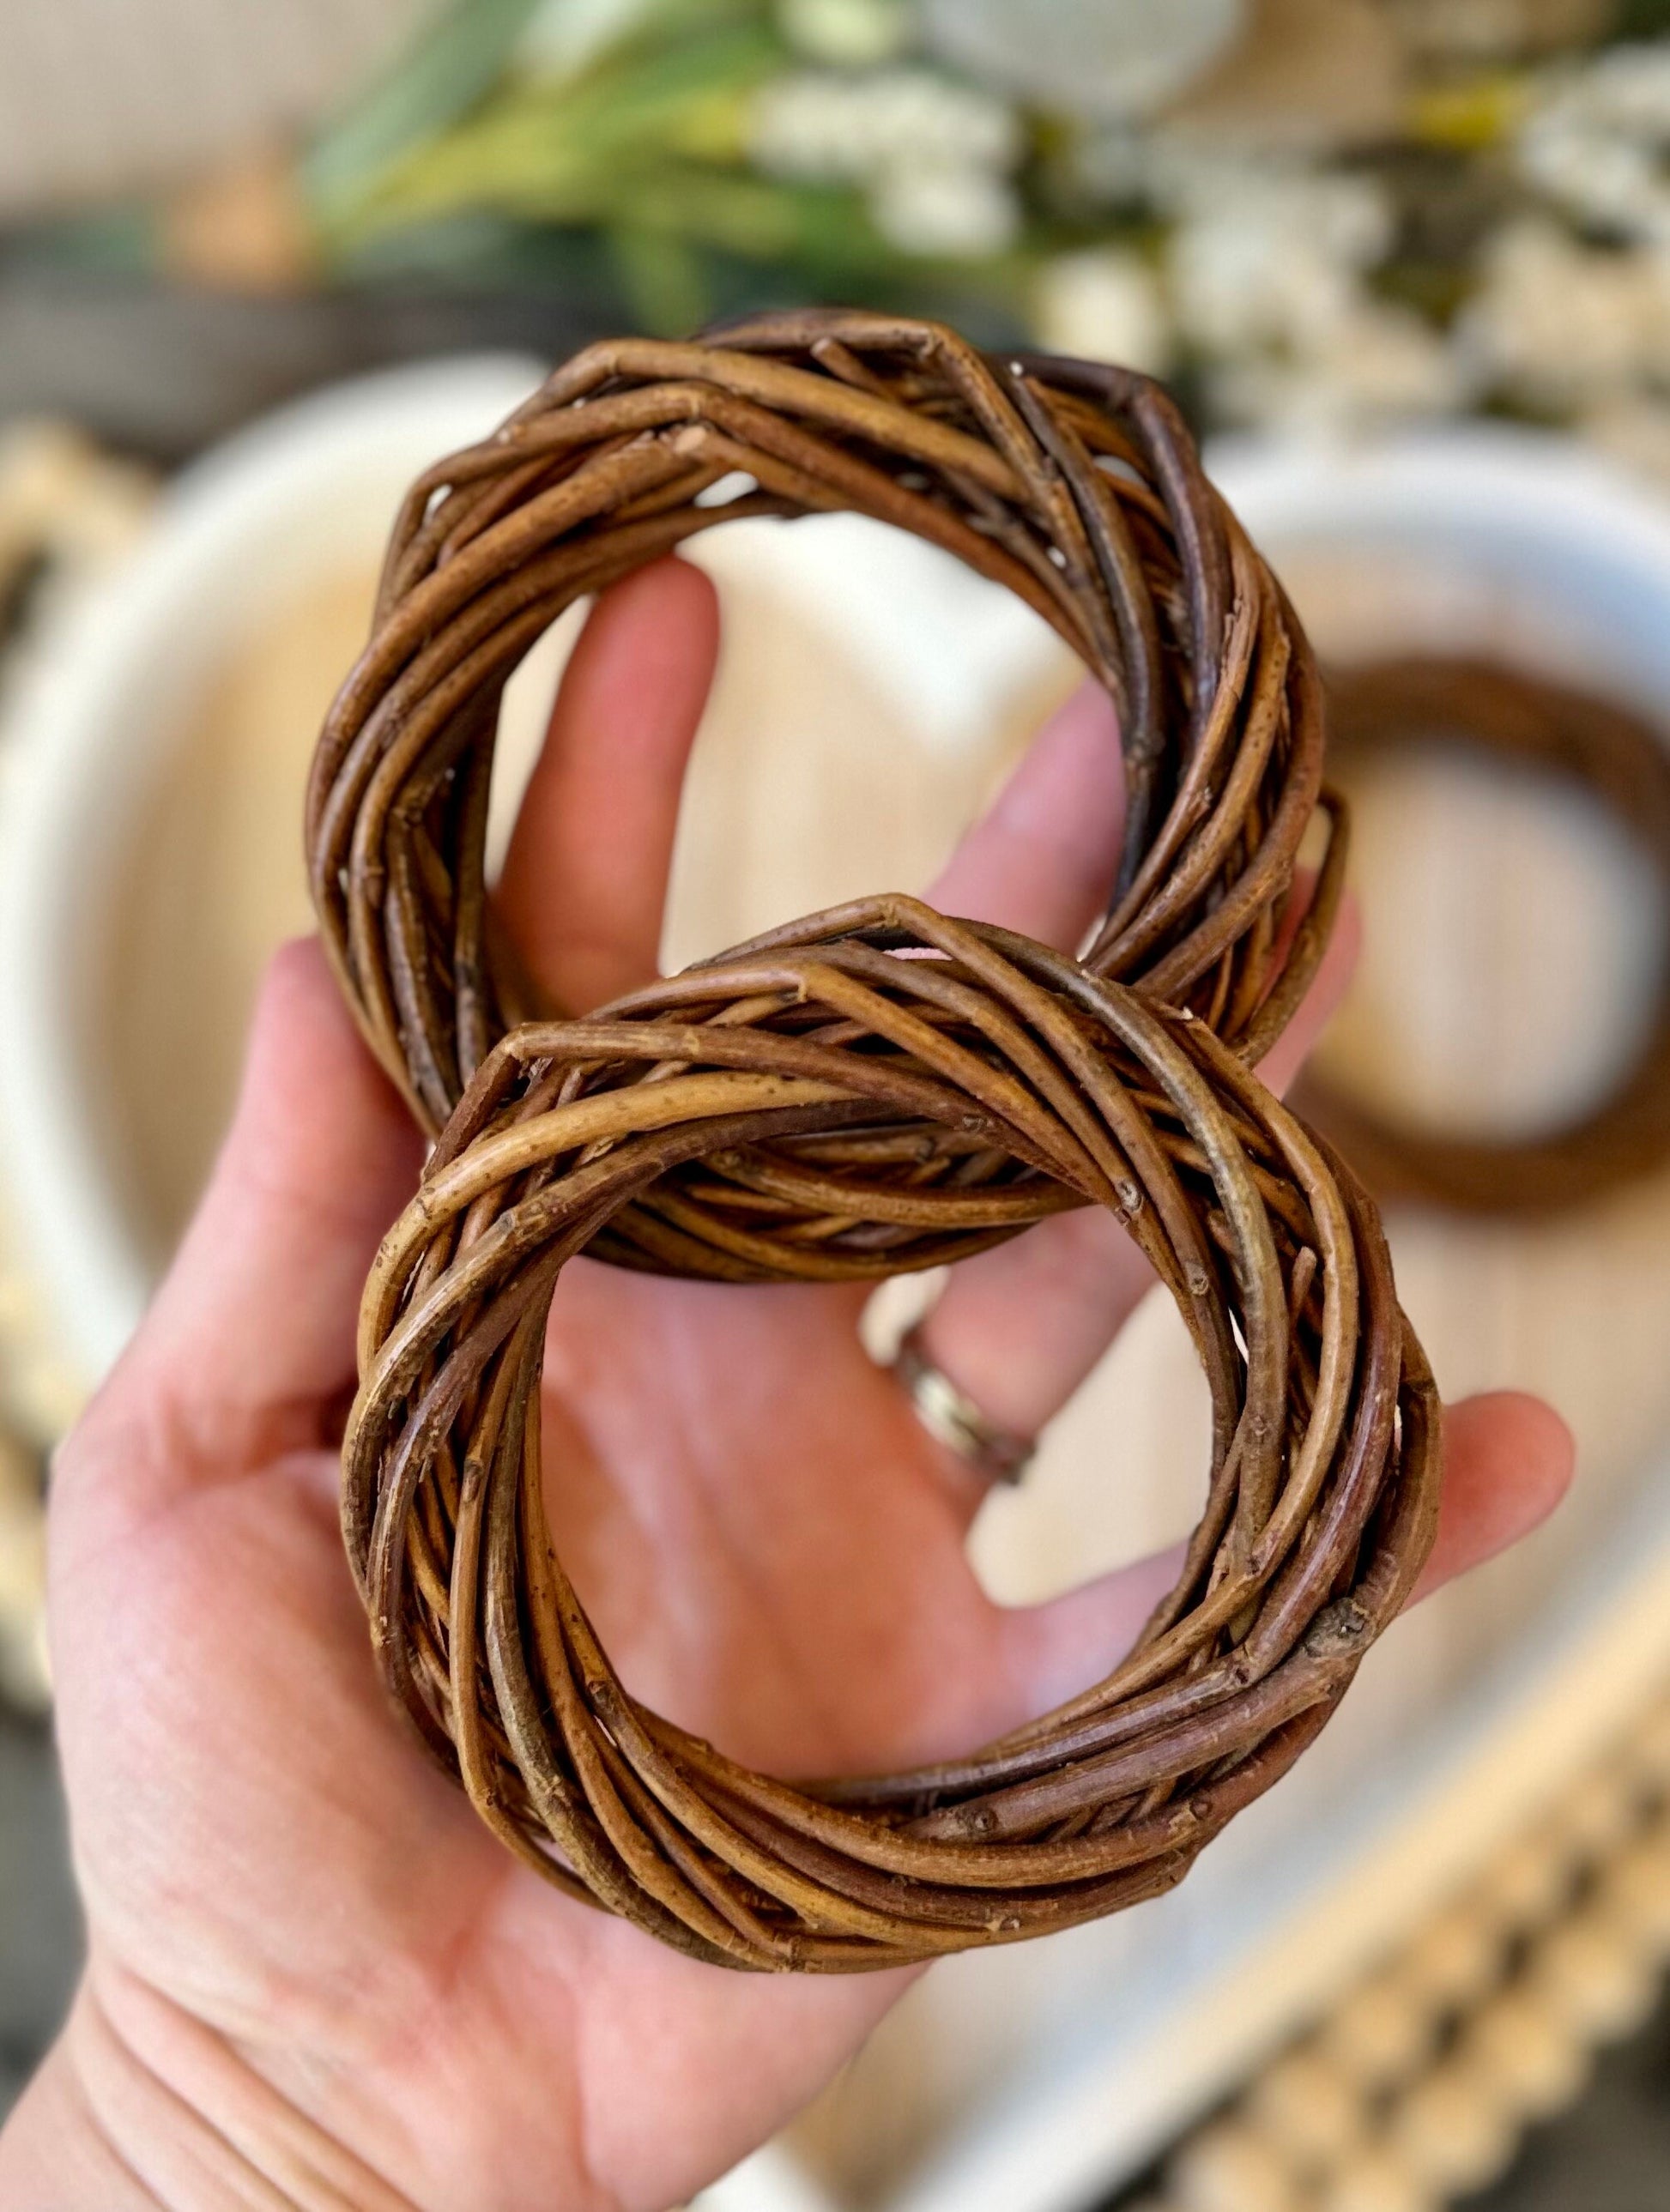 Willow Rings | Safe Toss Toy, Healthy, Natural Chew Toy for Rabbits, Chinchillas, Hamsters & Guinea Pigs, Enrichment Toy/Boredom Buster